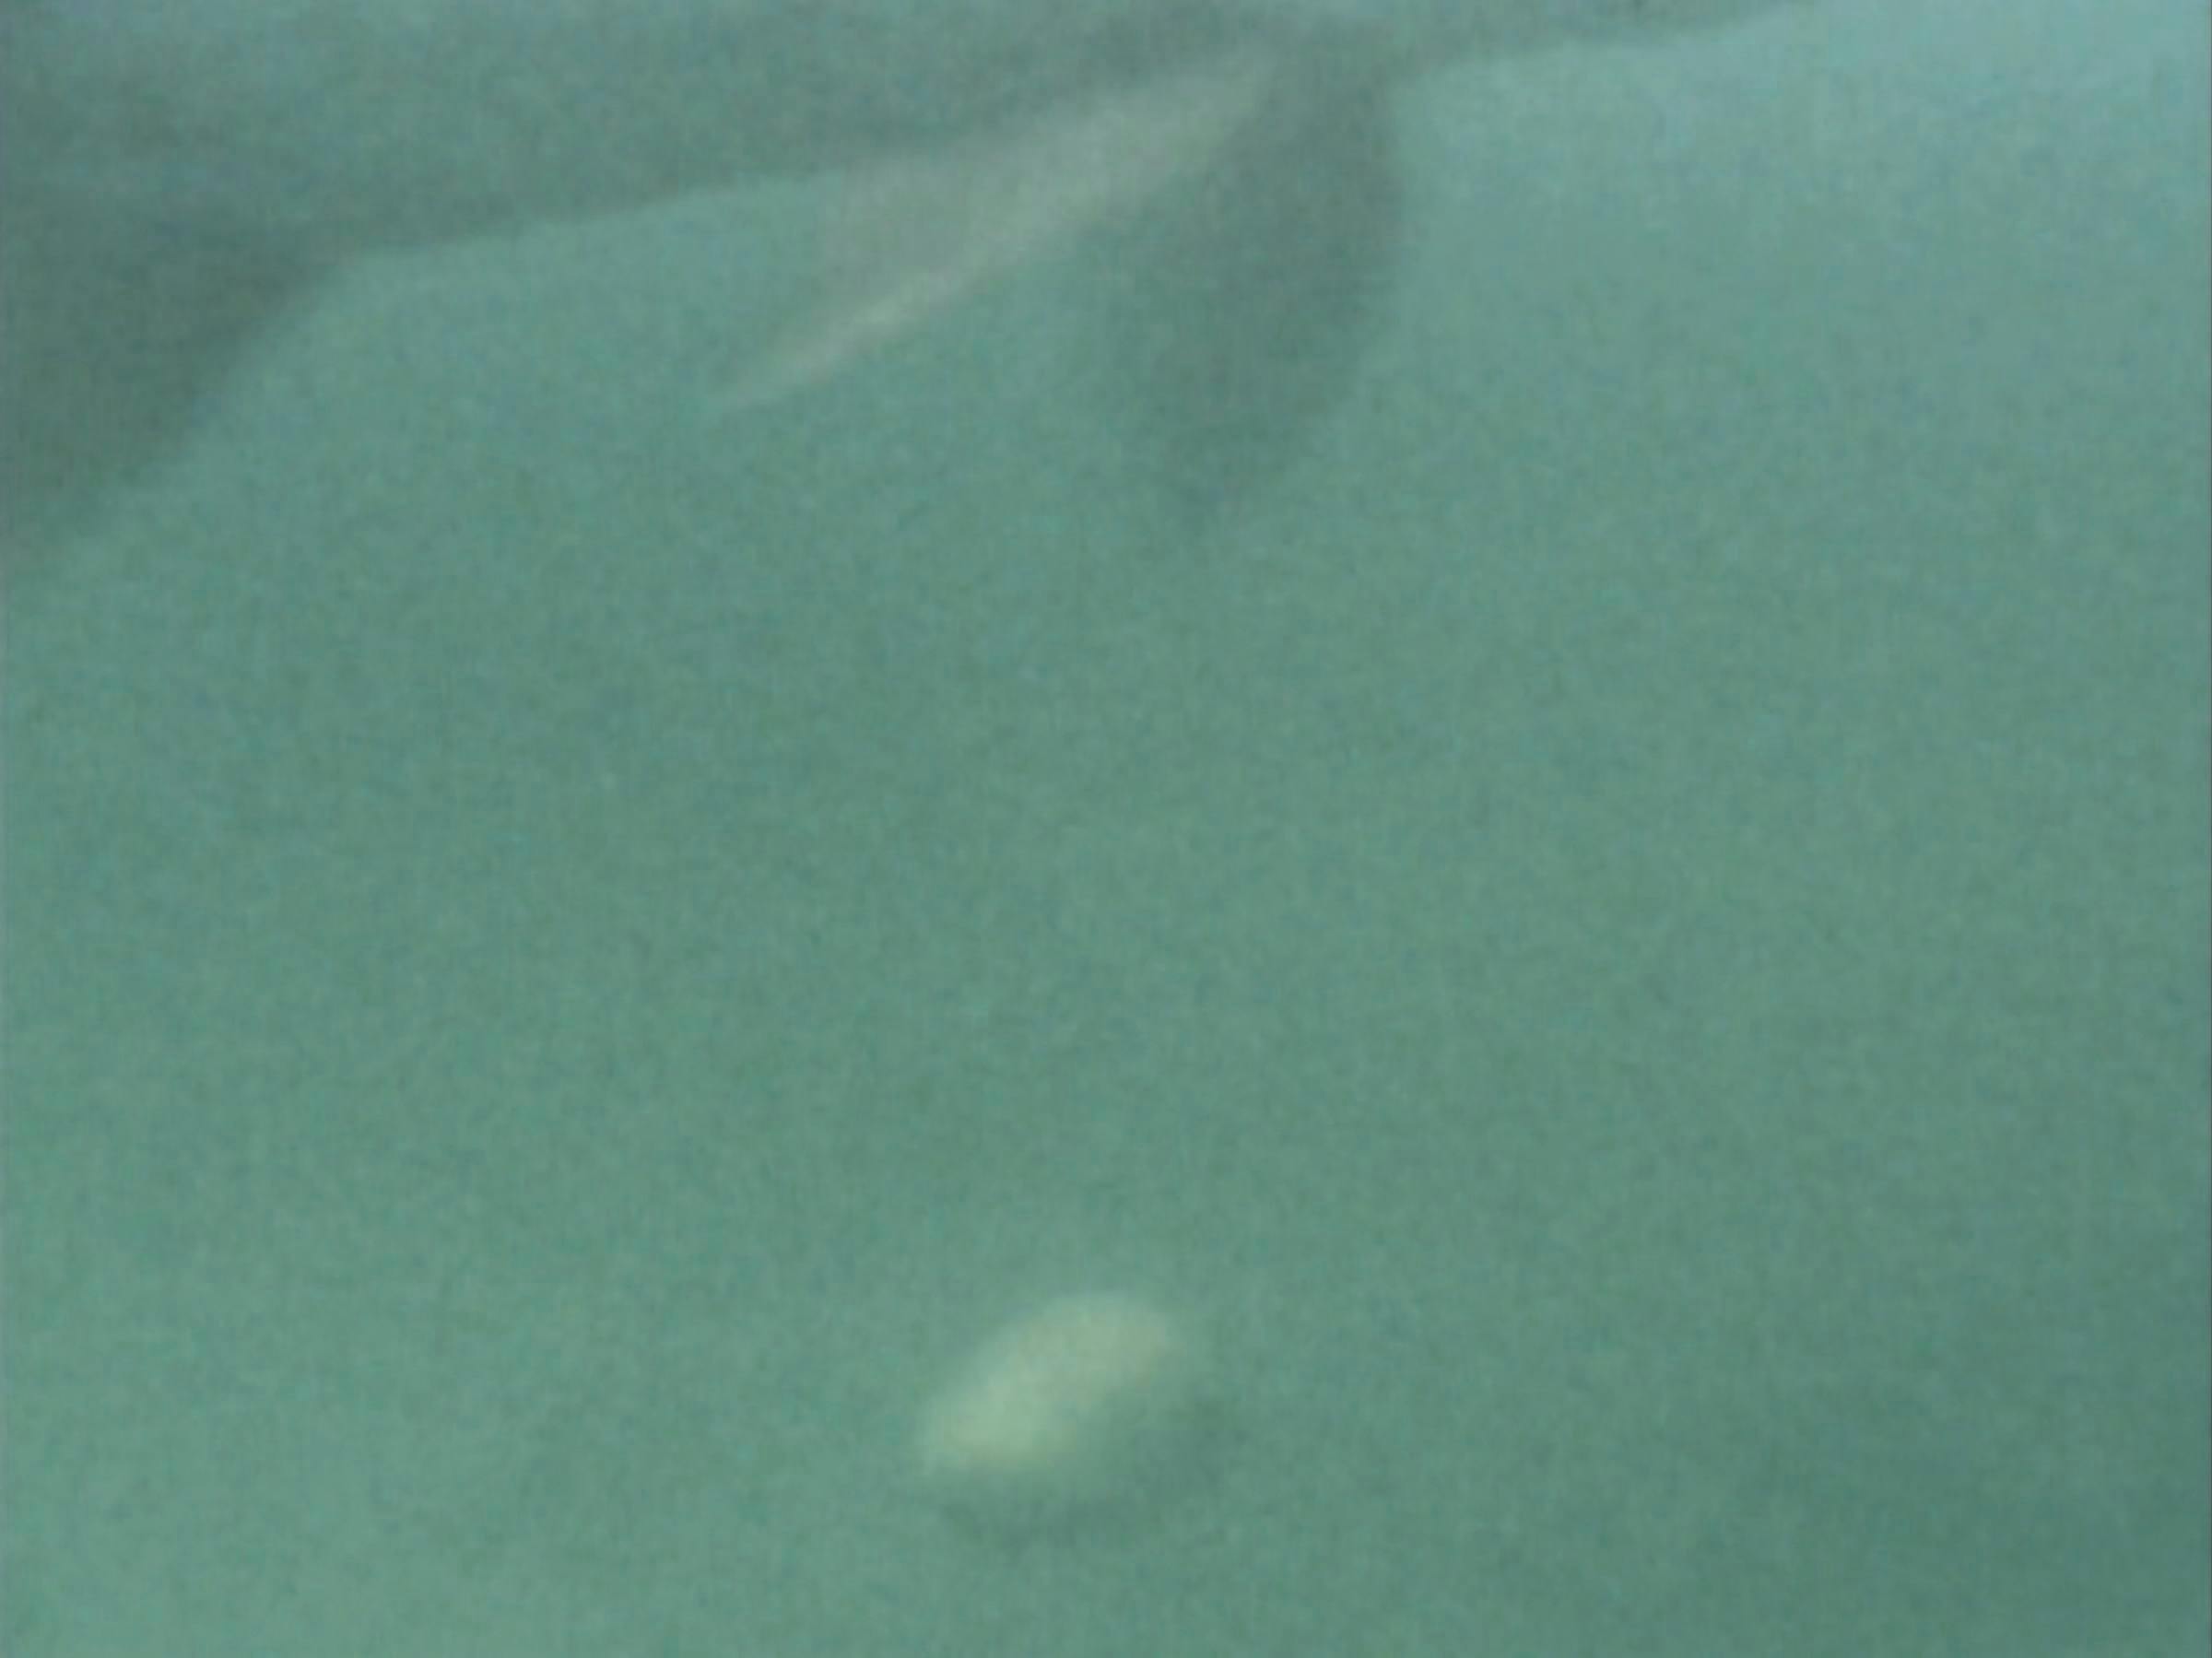 Underwater image with a white circular object at the bottom and fins at the top